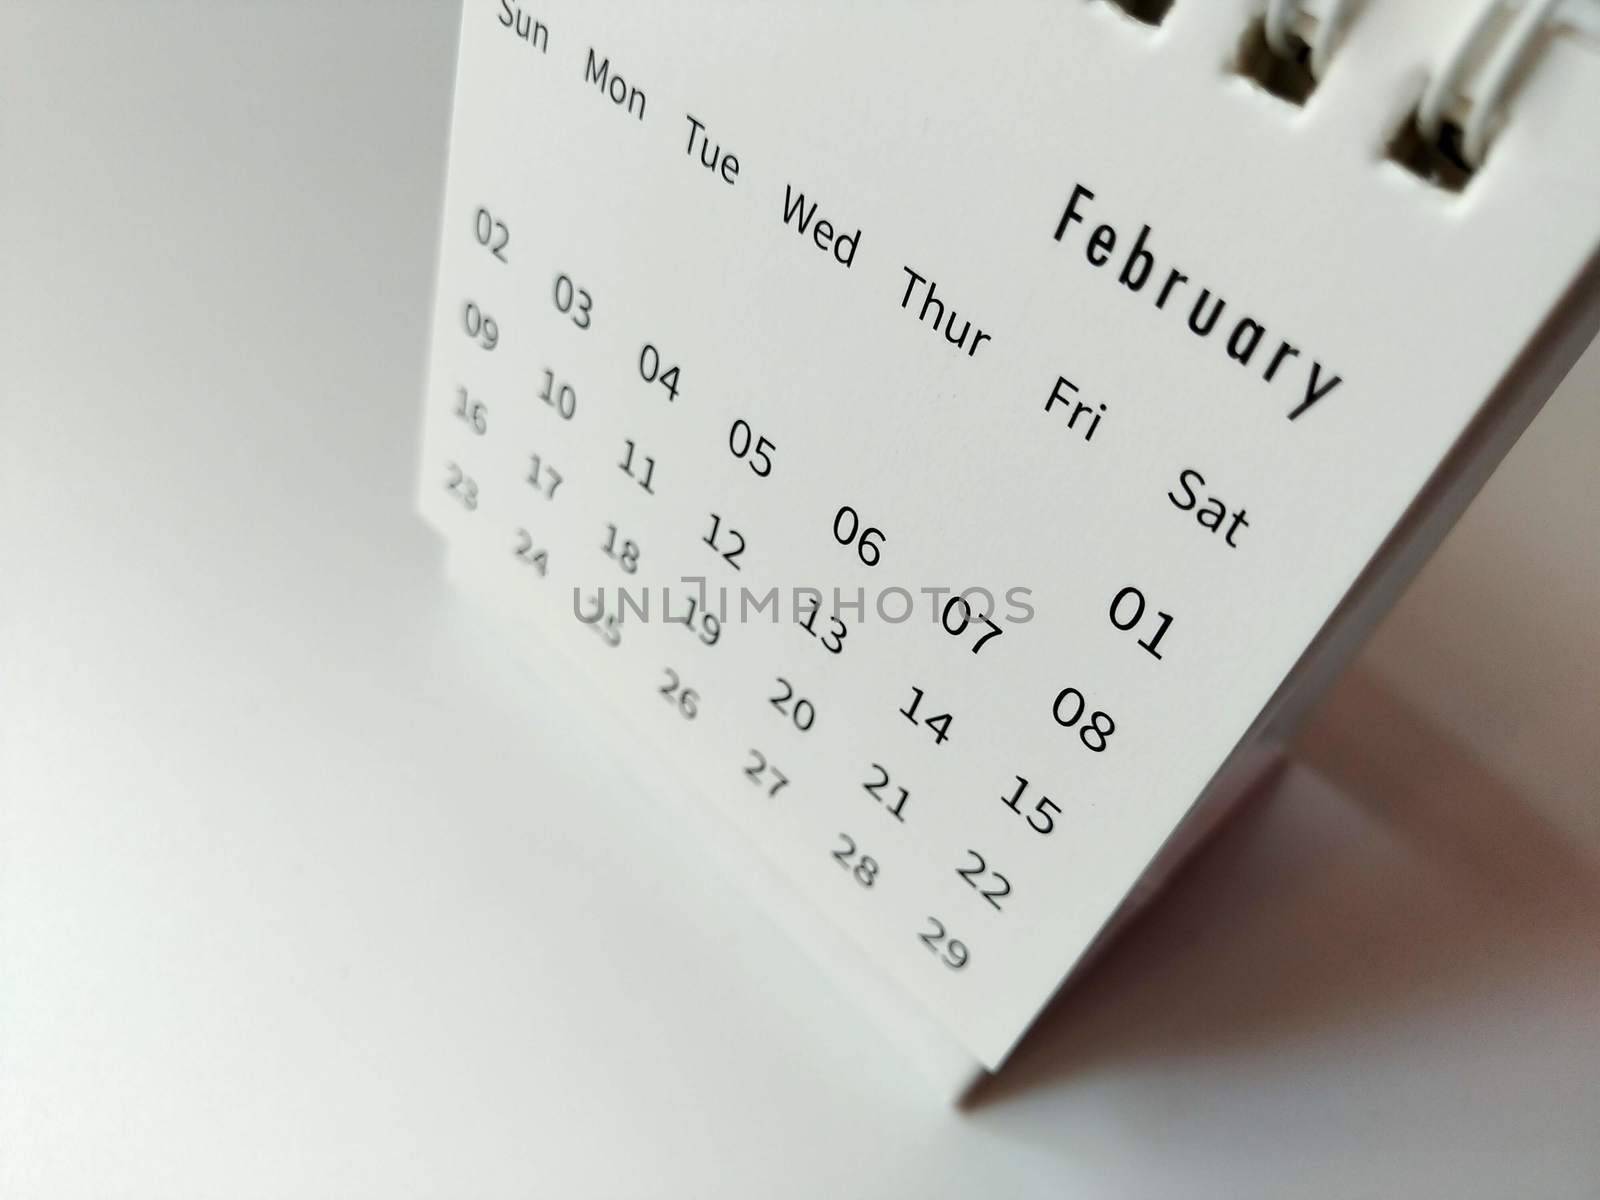 The calendar is placed on a white background